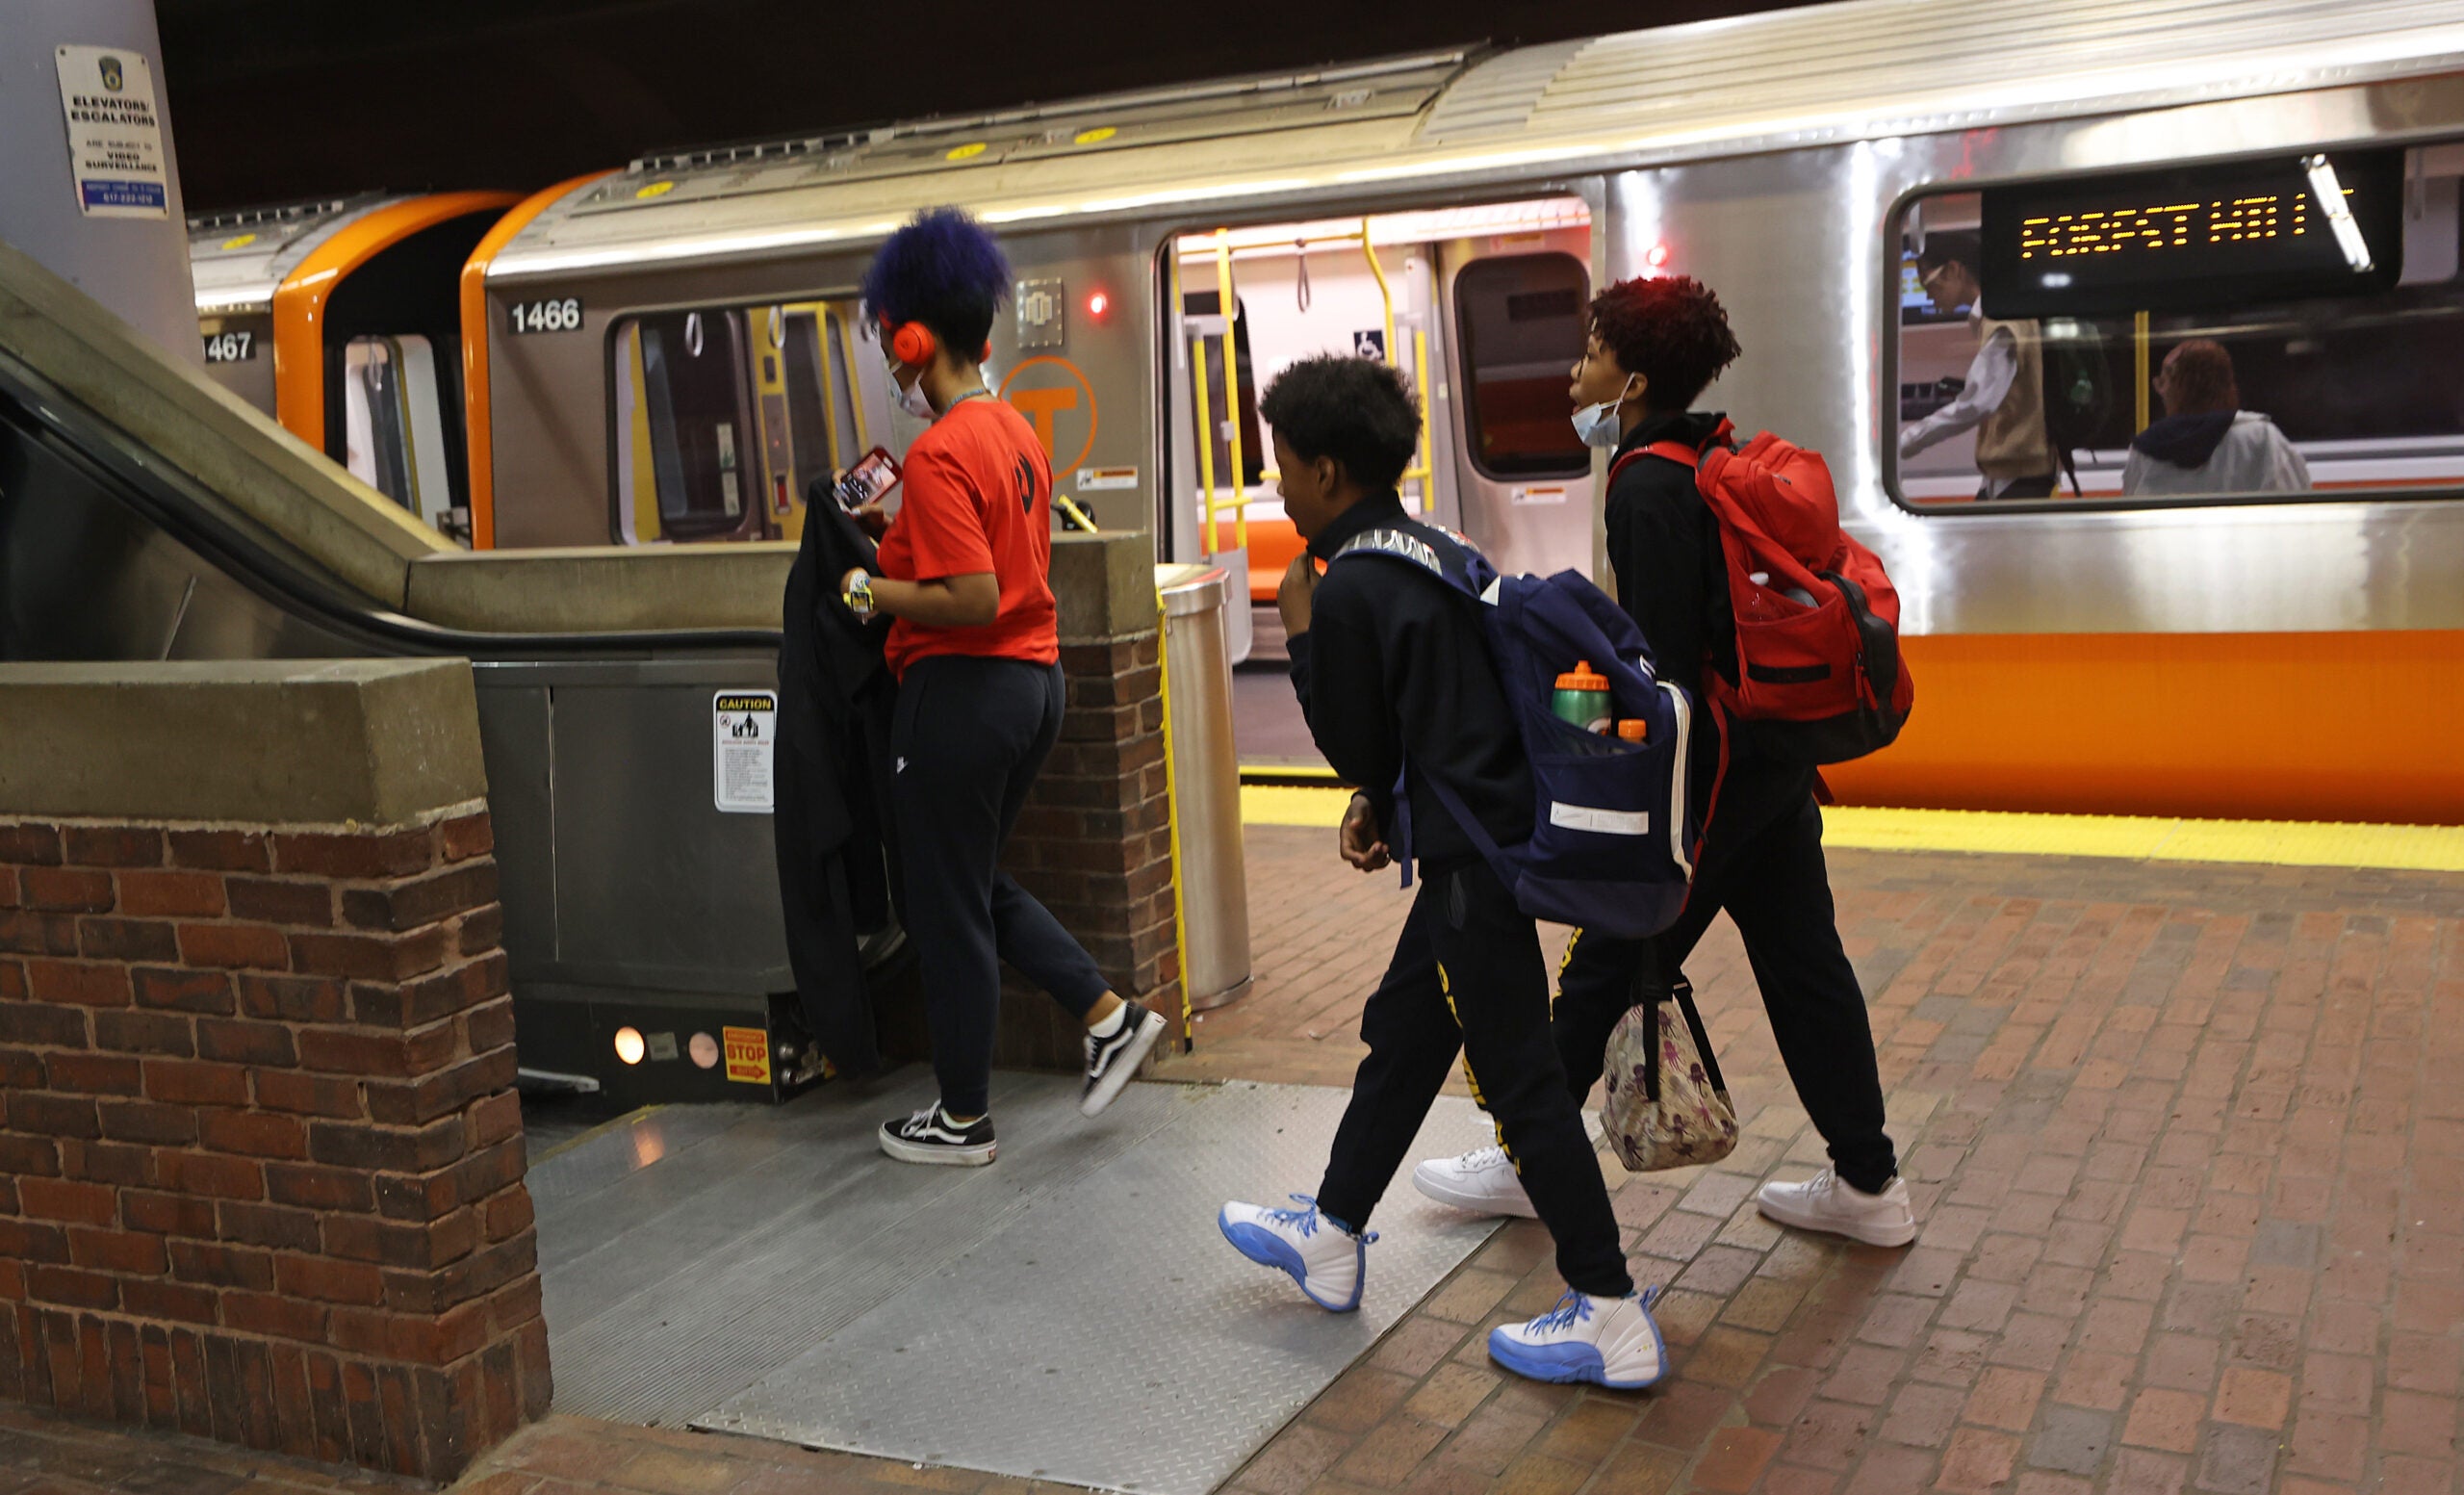 Scenes from the return of the Orange Line